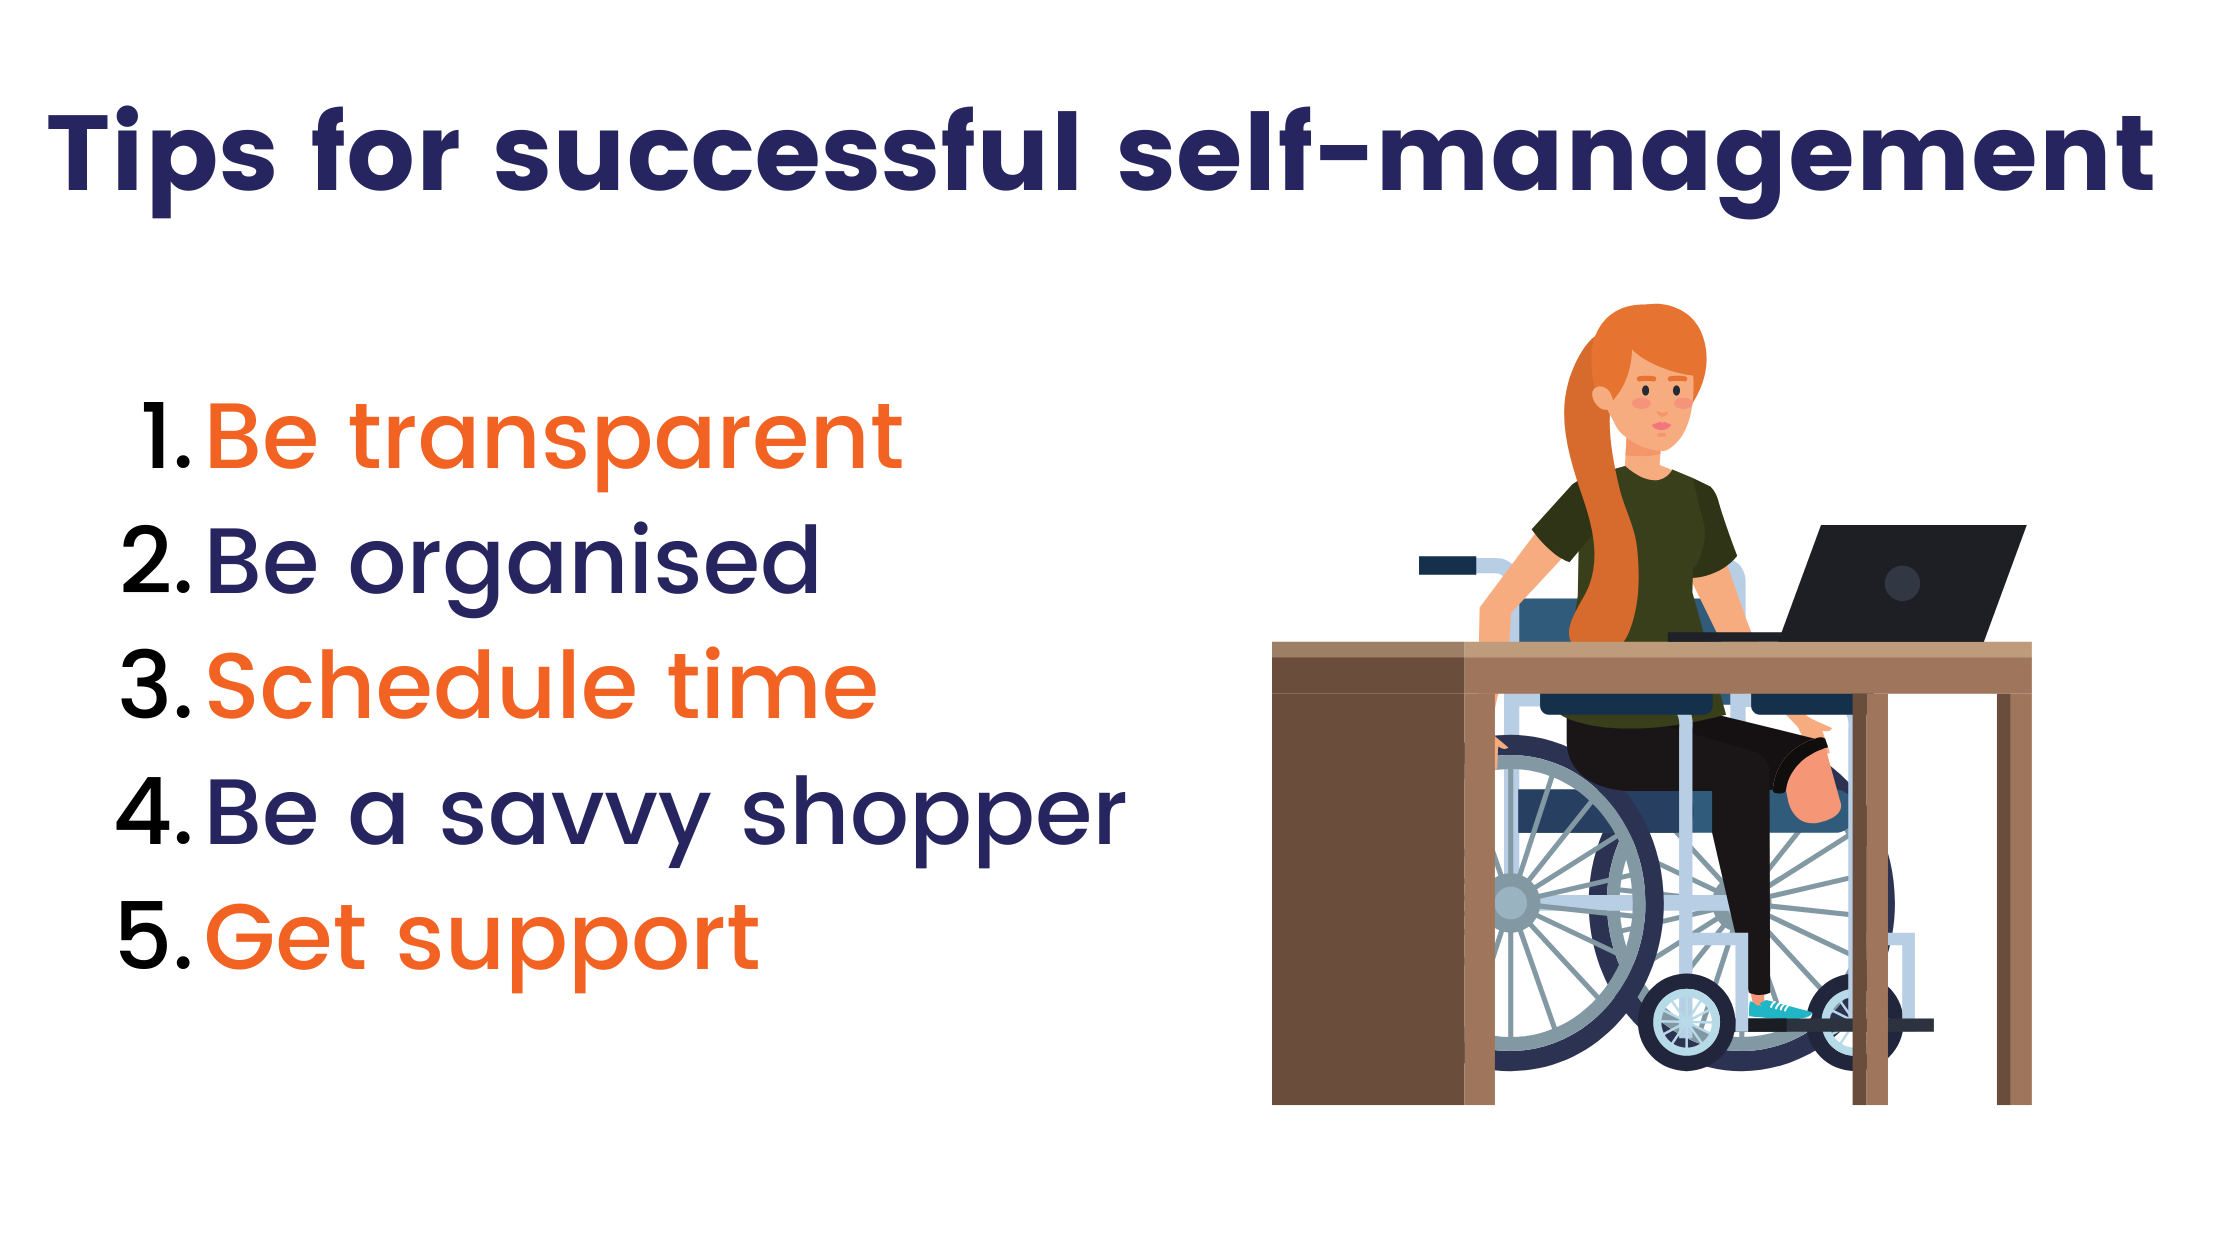 Tips for Successful Self Management 1. Be transparent, 2 Be Organised, 3.Schedule Time, 4. Be a savvy shopper, 5. Get Support - Graphic of a women at a laptop, she is seated in a wheelchair 